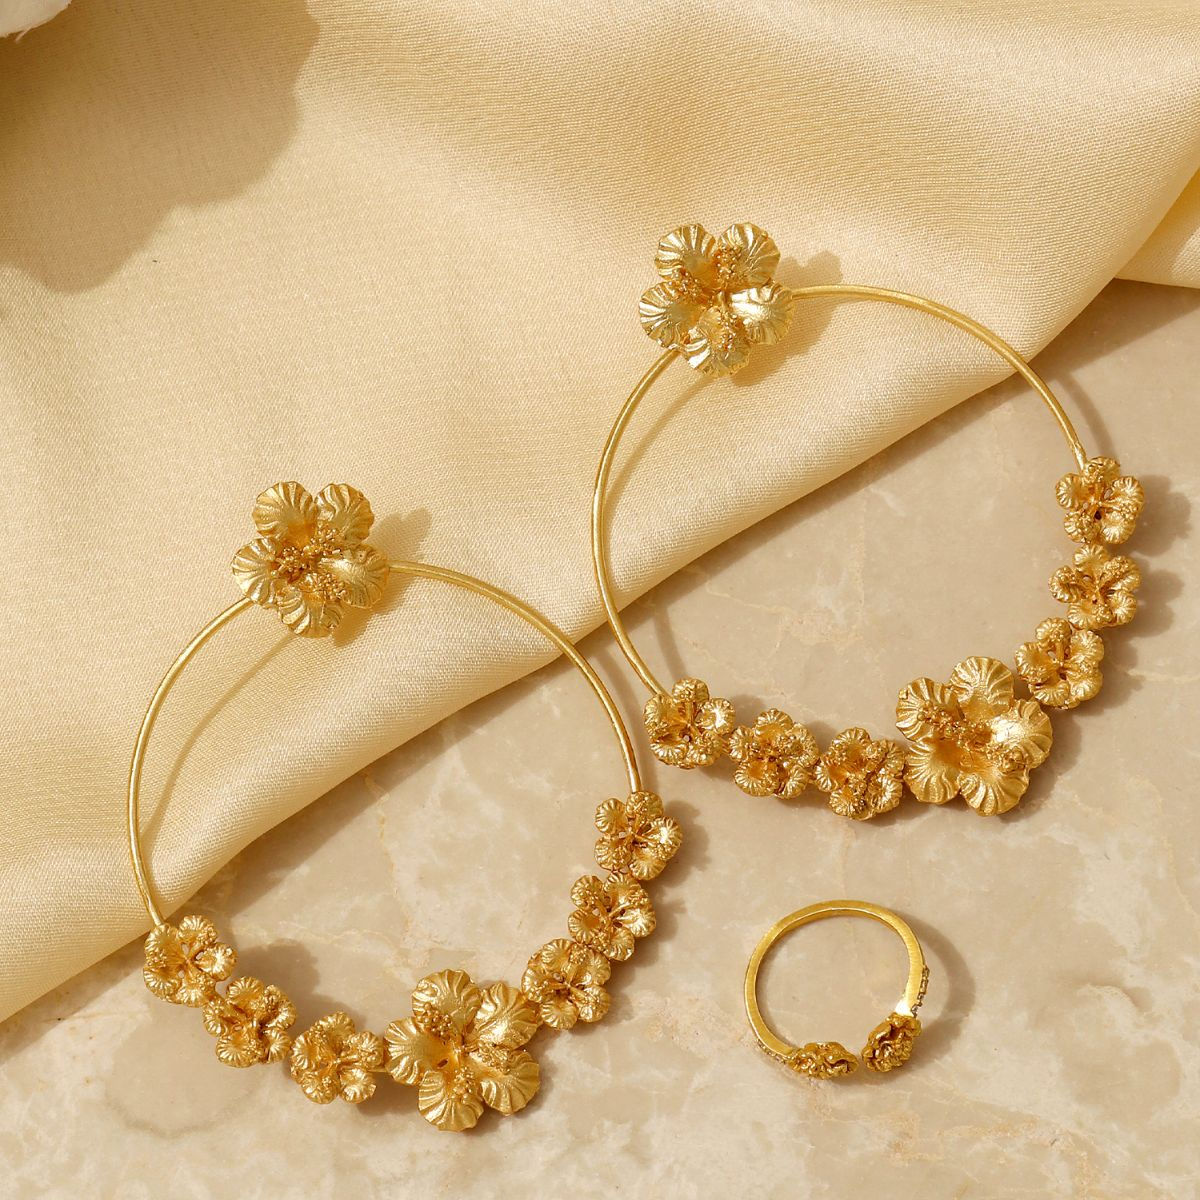 Chic Statement Floral Open Ring and Hoop Earrings Set